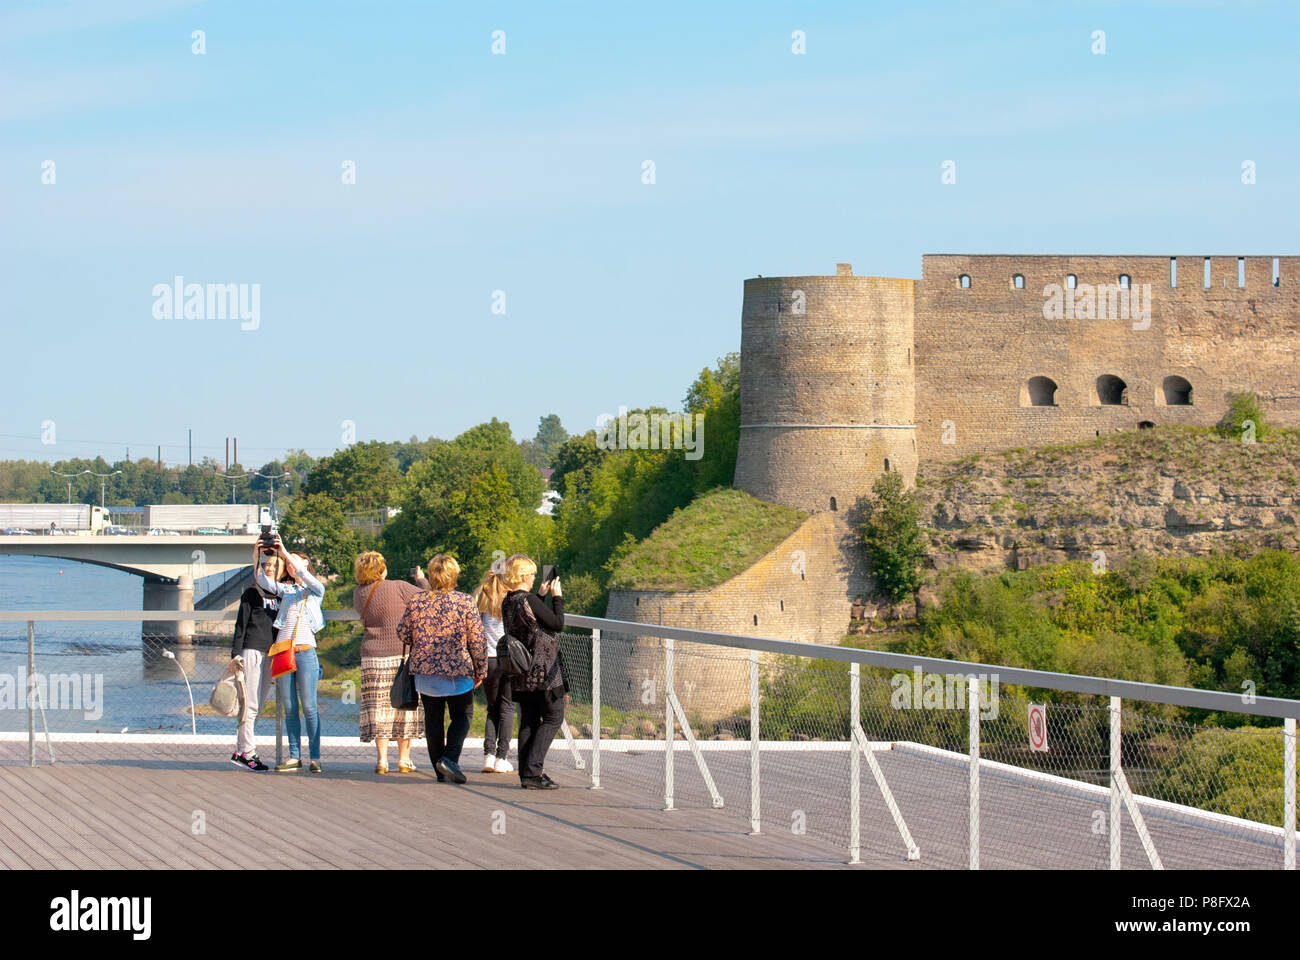 NARVA, ESTONIA - AUGUST 21, 2016: People on observation deck in Estonian Town Narva take pictures in front of the Ivangorod Fortress in Russia Stock Photo